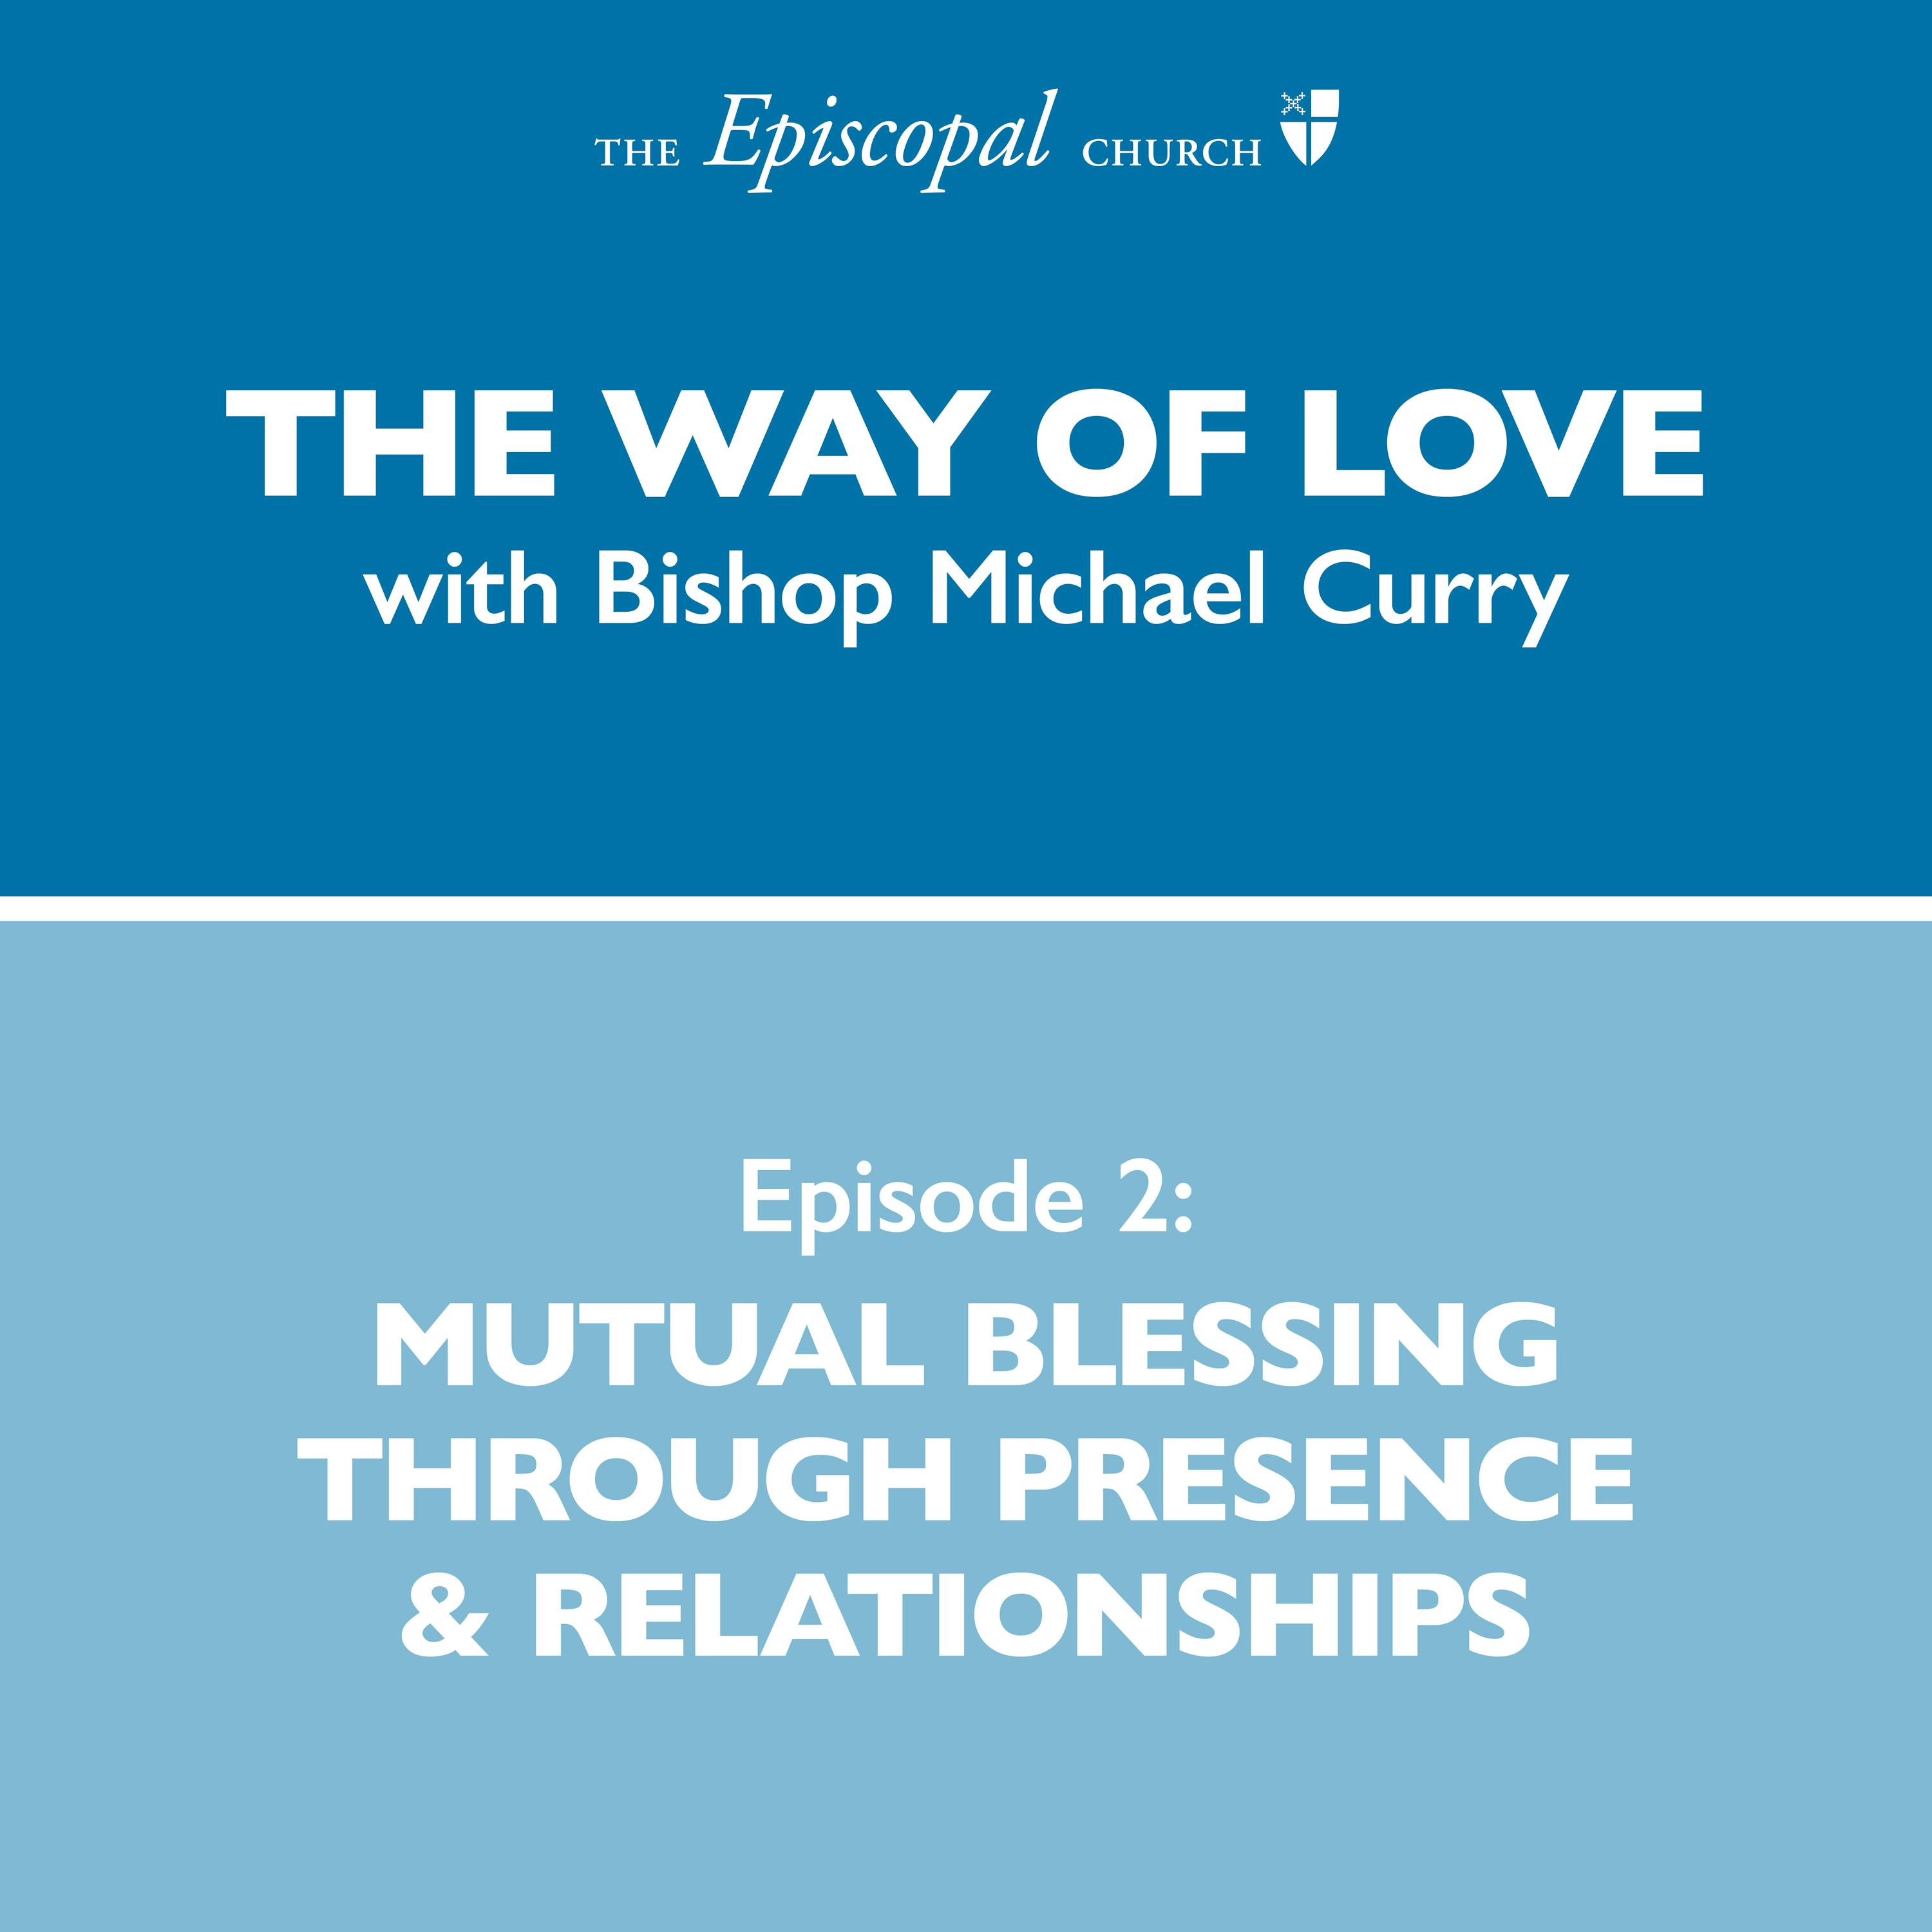 Mutual Blessing Through Presence & Relationships